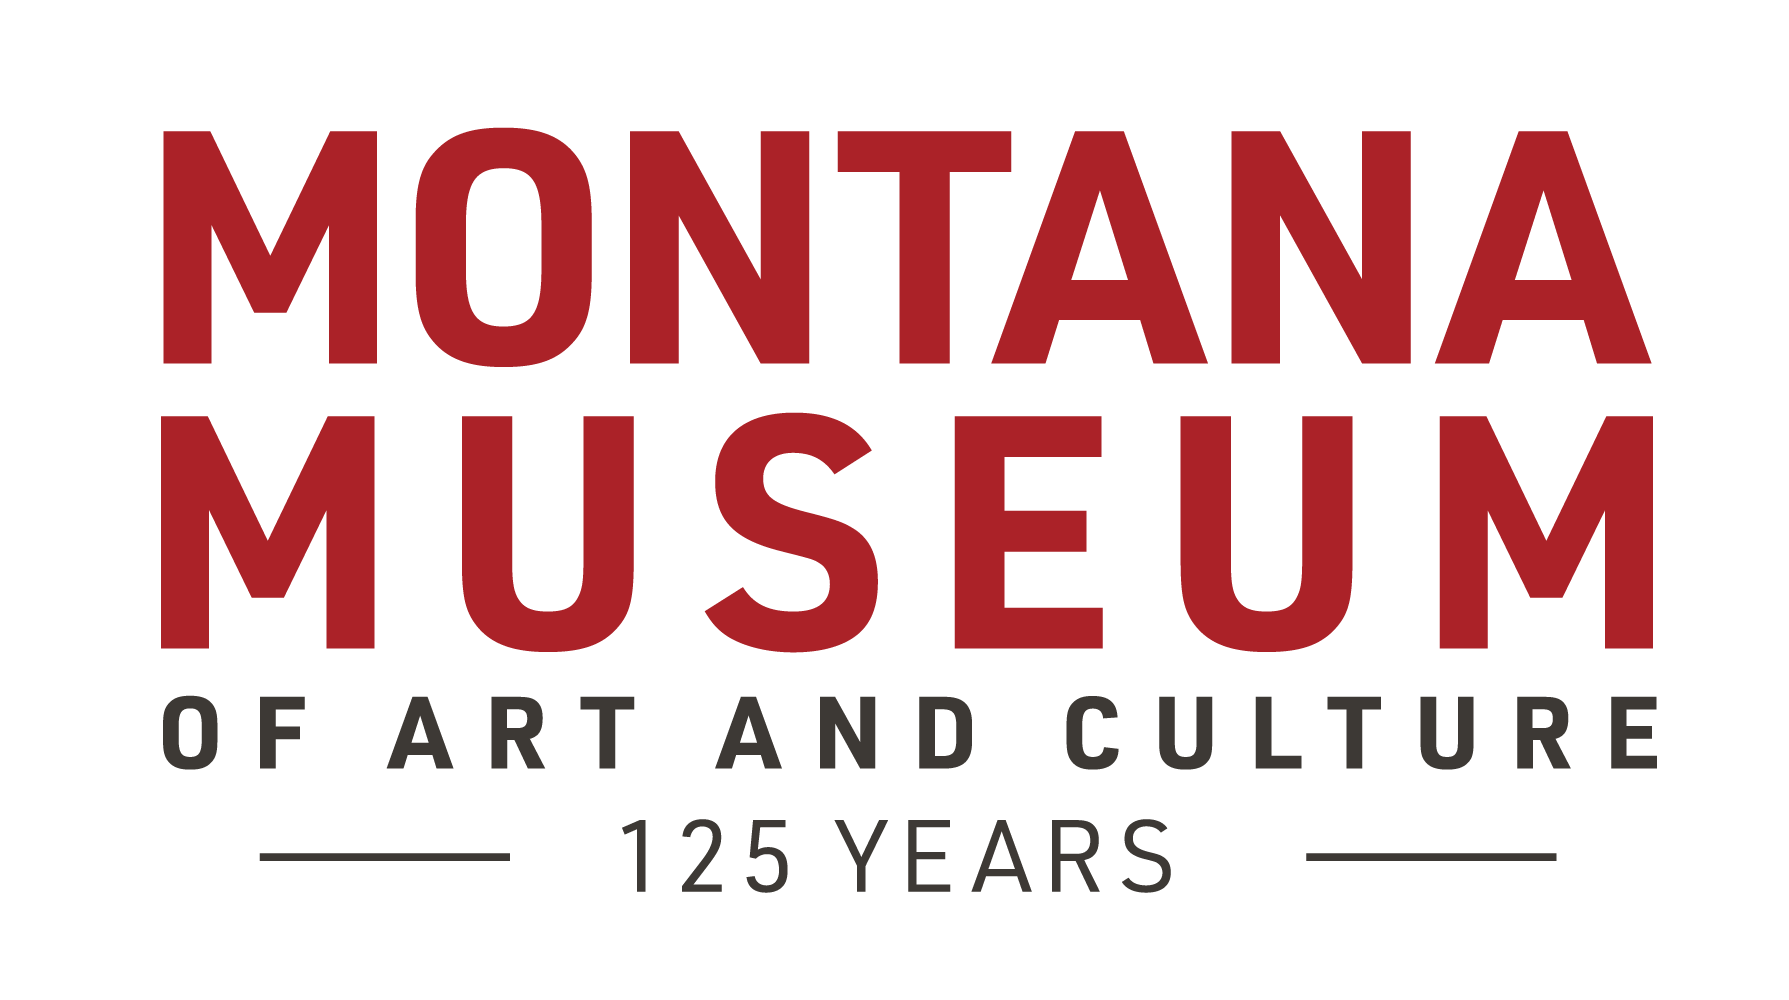 Montana Museum of Art and Culture